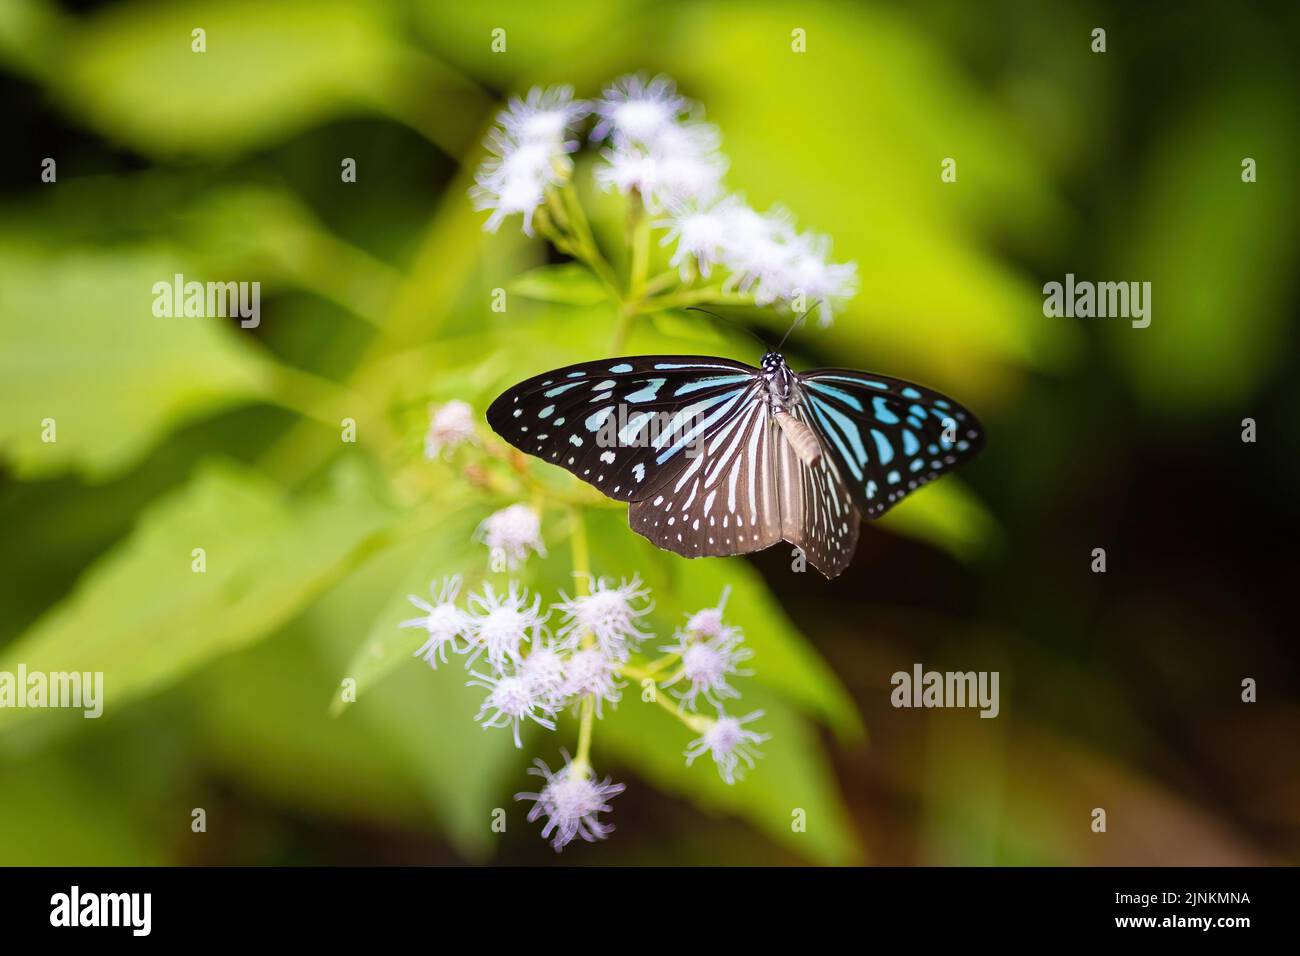 Fly shot of a Black Blue tiger butterfly (Tirumala septentrionis) Stock Photo